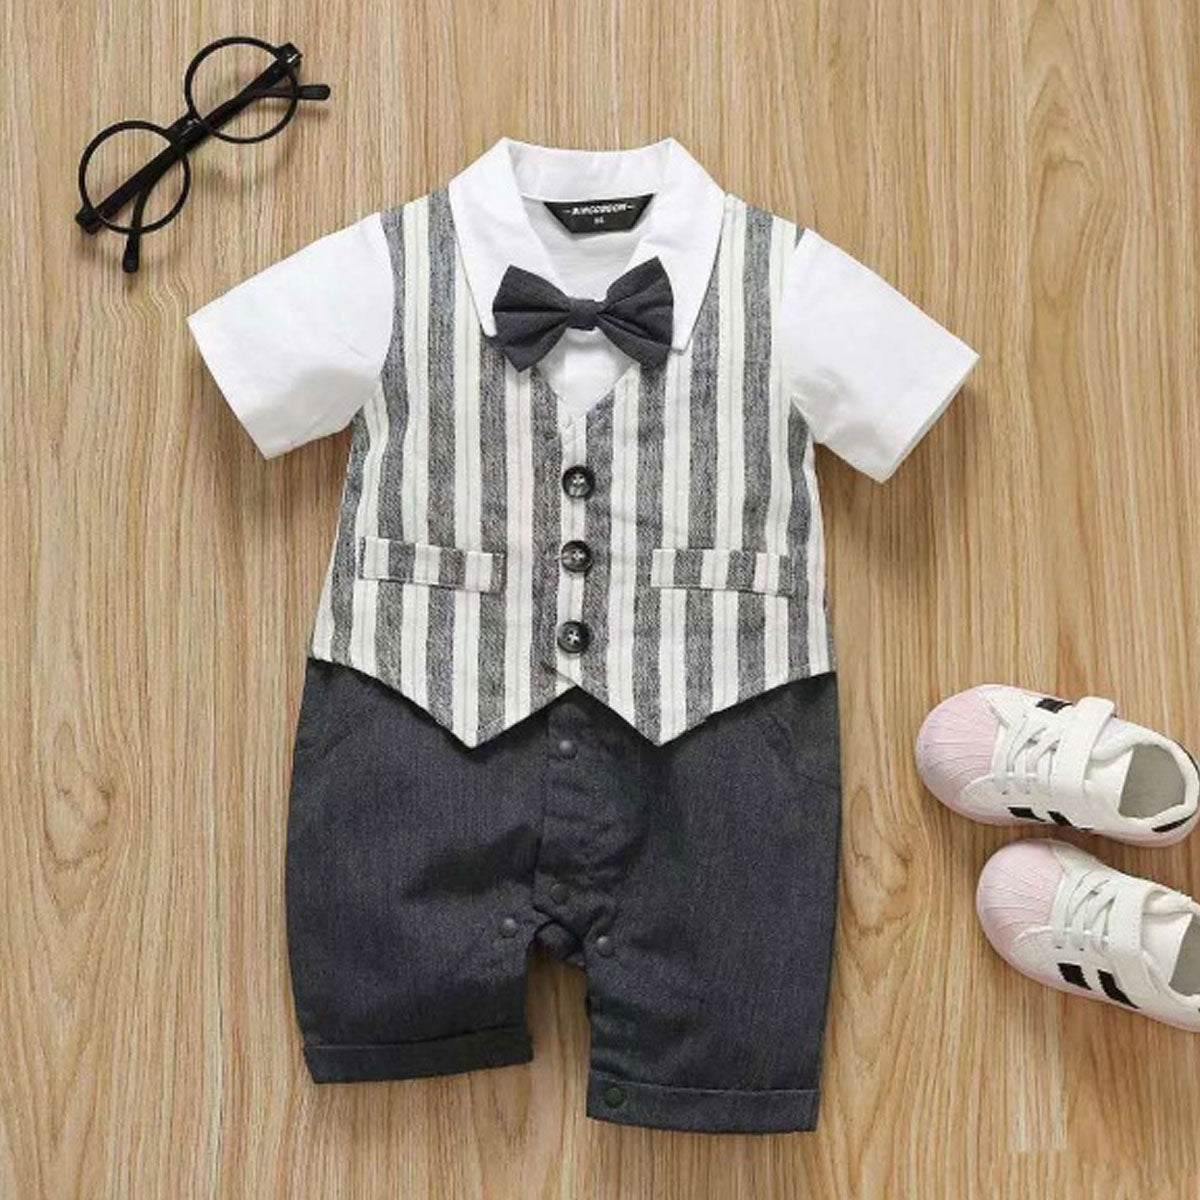 Cotton Infant Plaid Outfits Romper With Bow